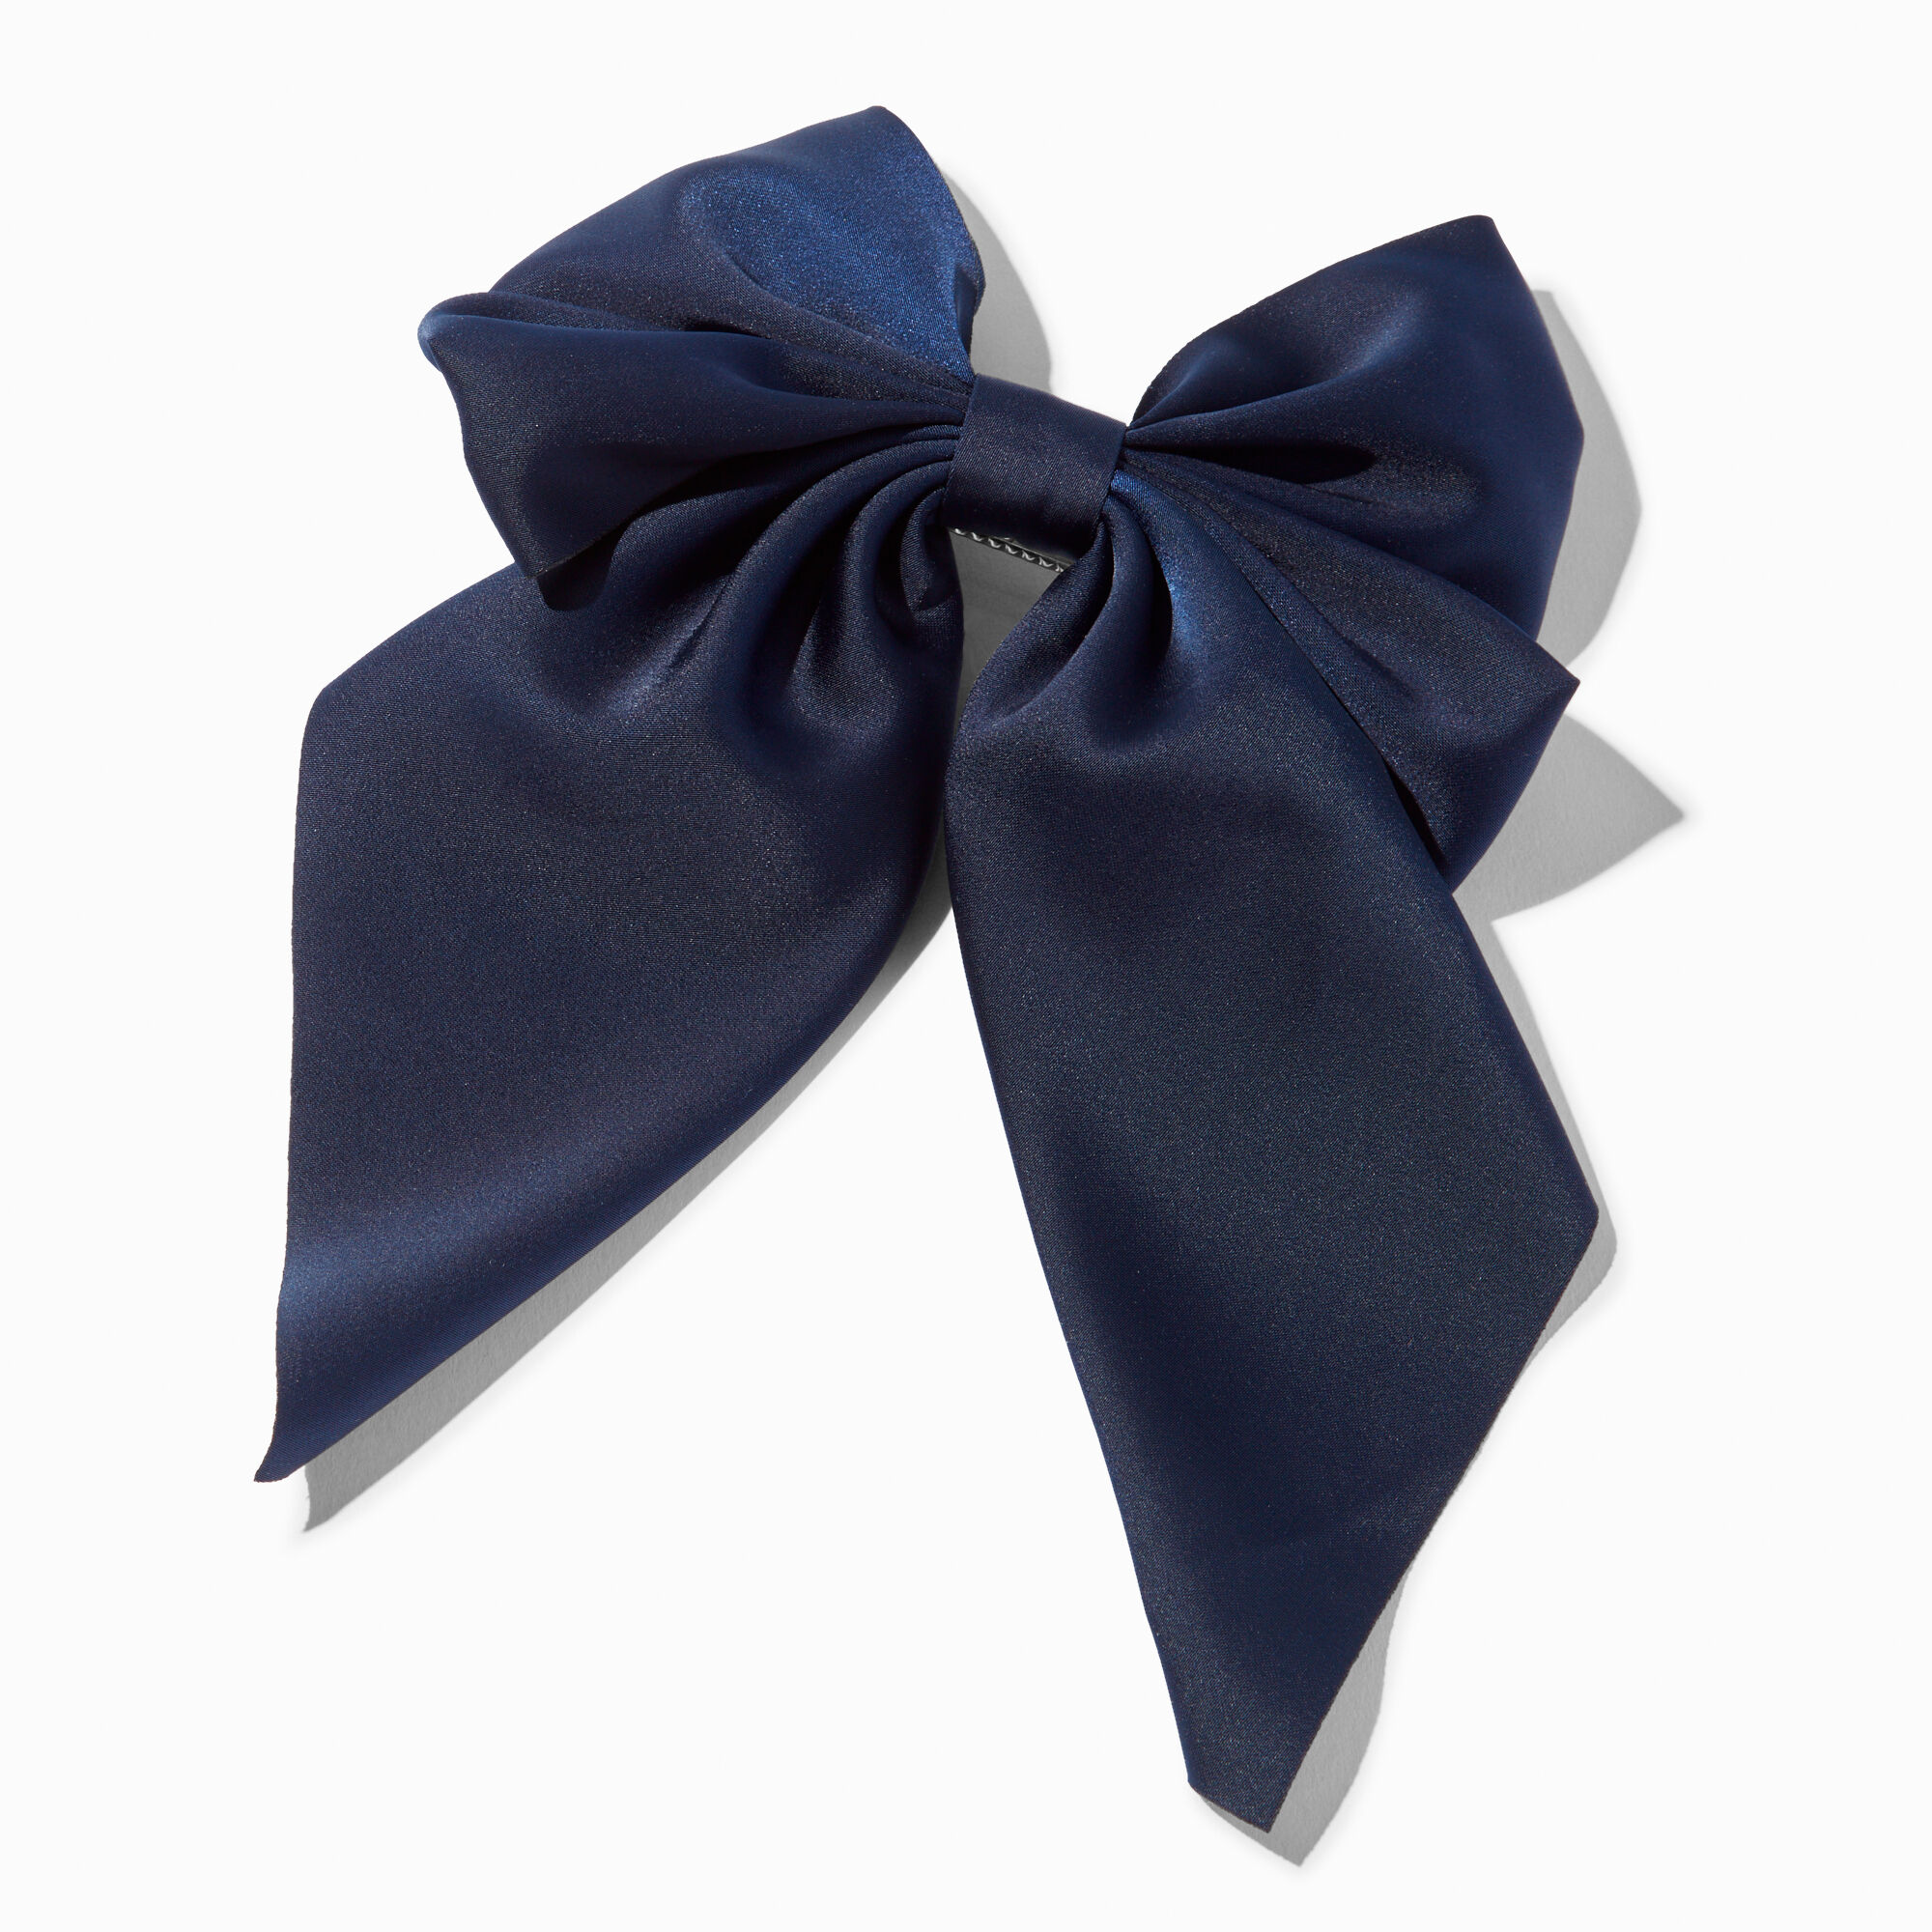 View Claires Satin Bow Barrette Hair Clip Navy Blue information